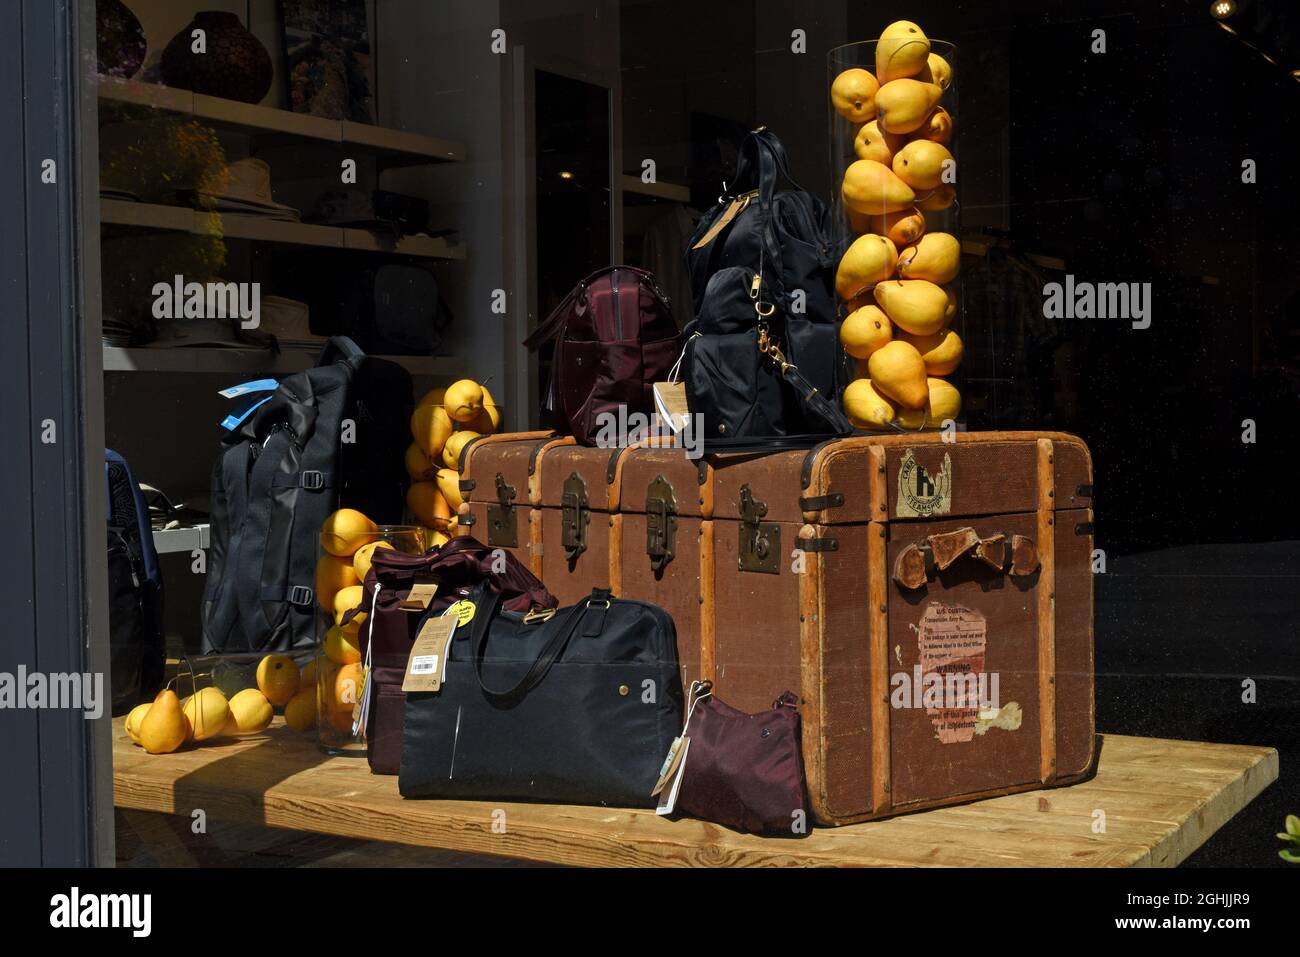 A display of travel luggage including new bags and an old trunk plus a glass vase full of lemons Stock Photo